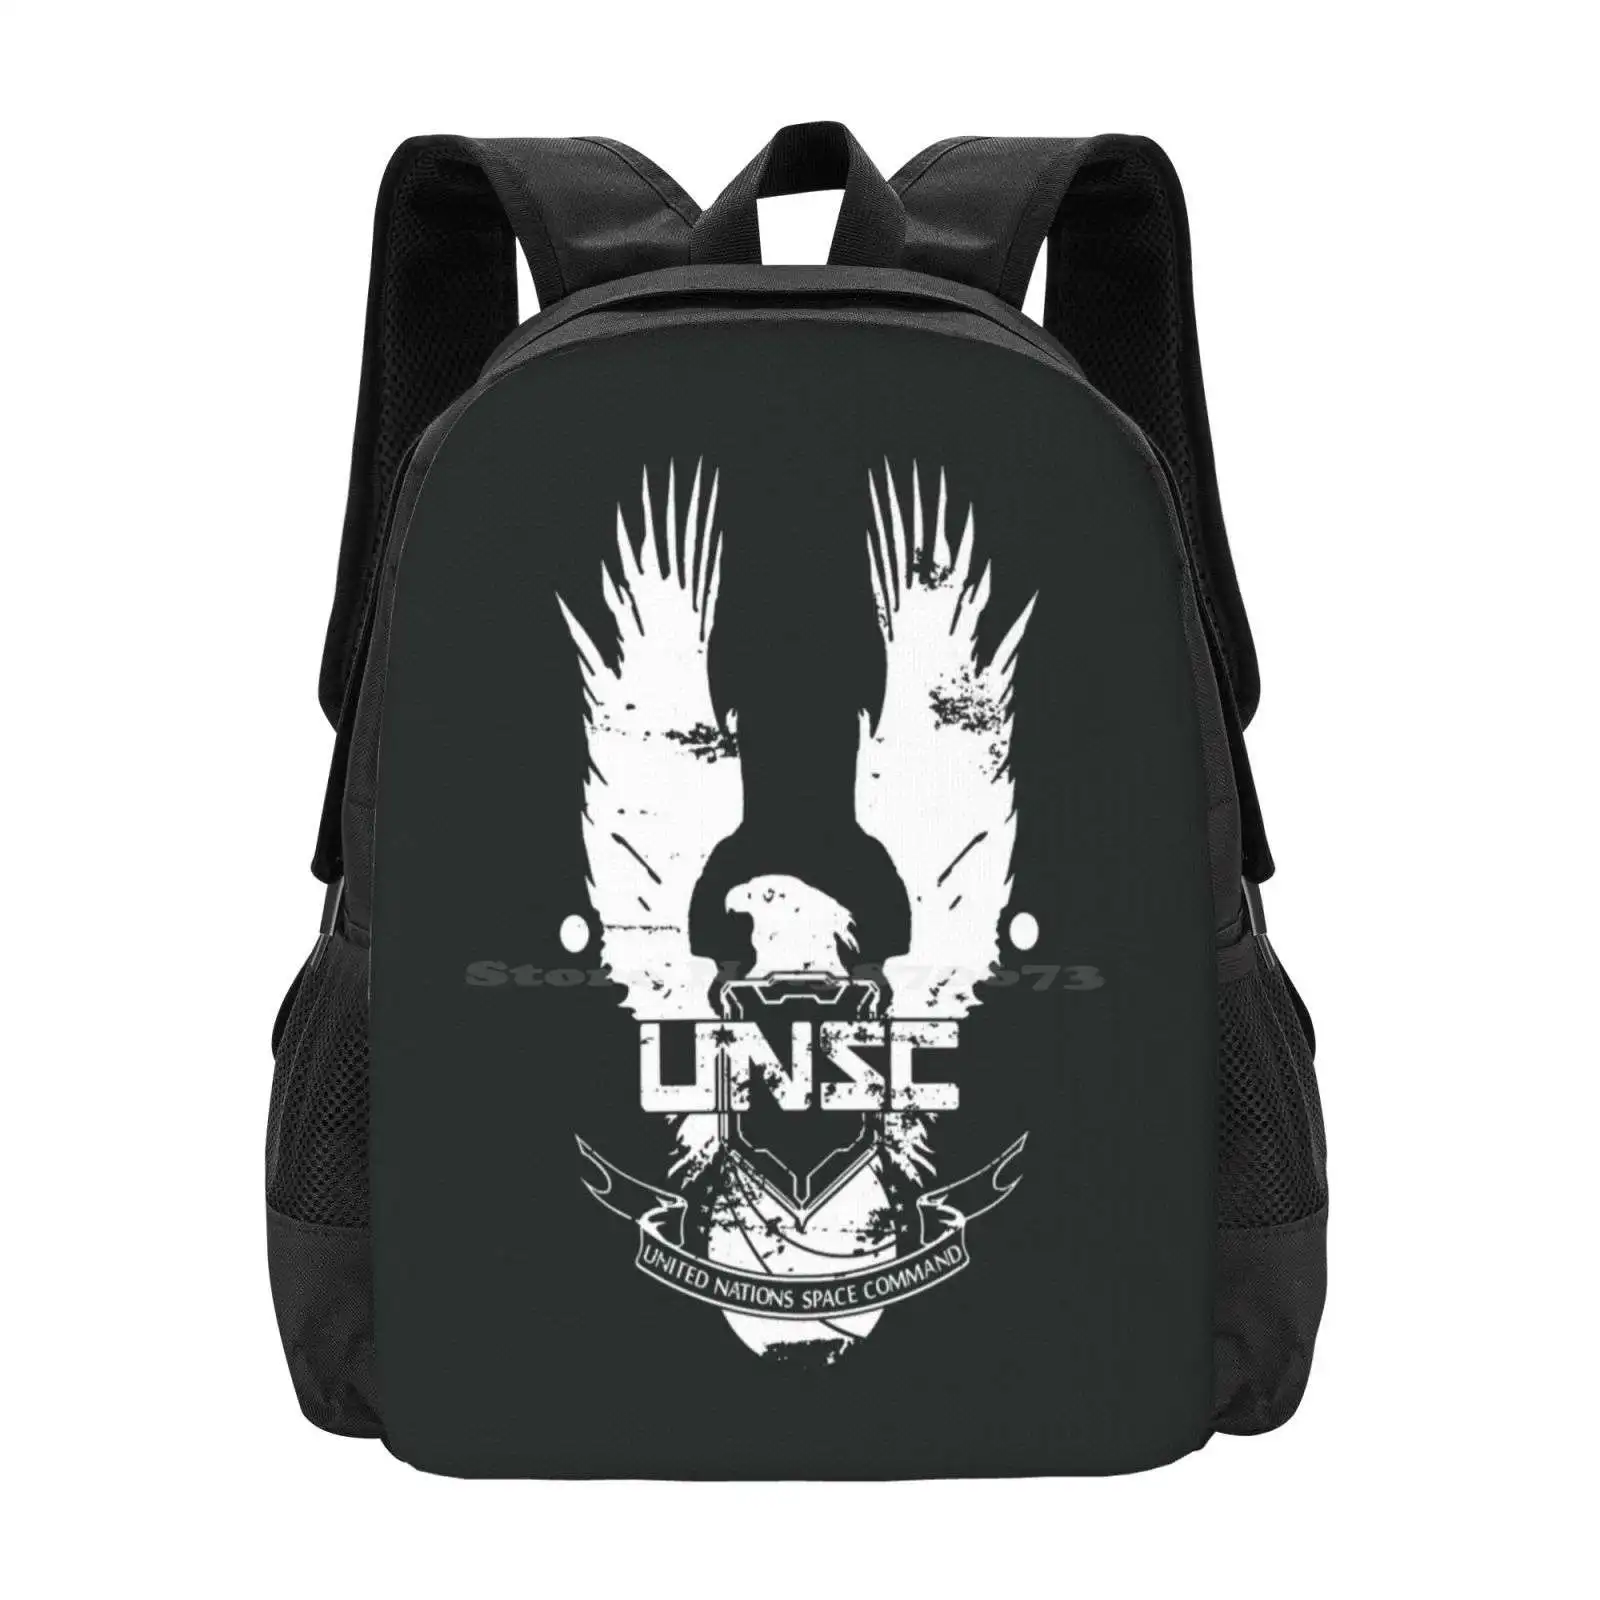 

Unsc Worn Logo High Quality School Bags Travel Laptop Backpack Unsc Worn Distressed Logo Science Reach 3 Covenant United